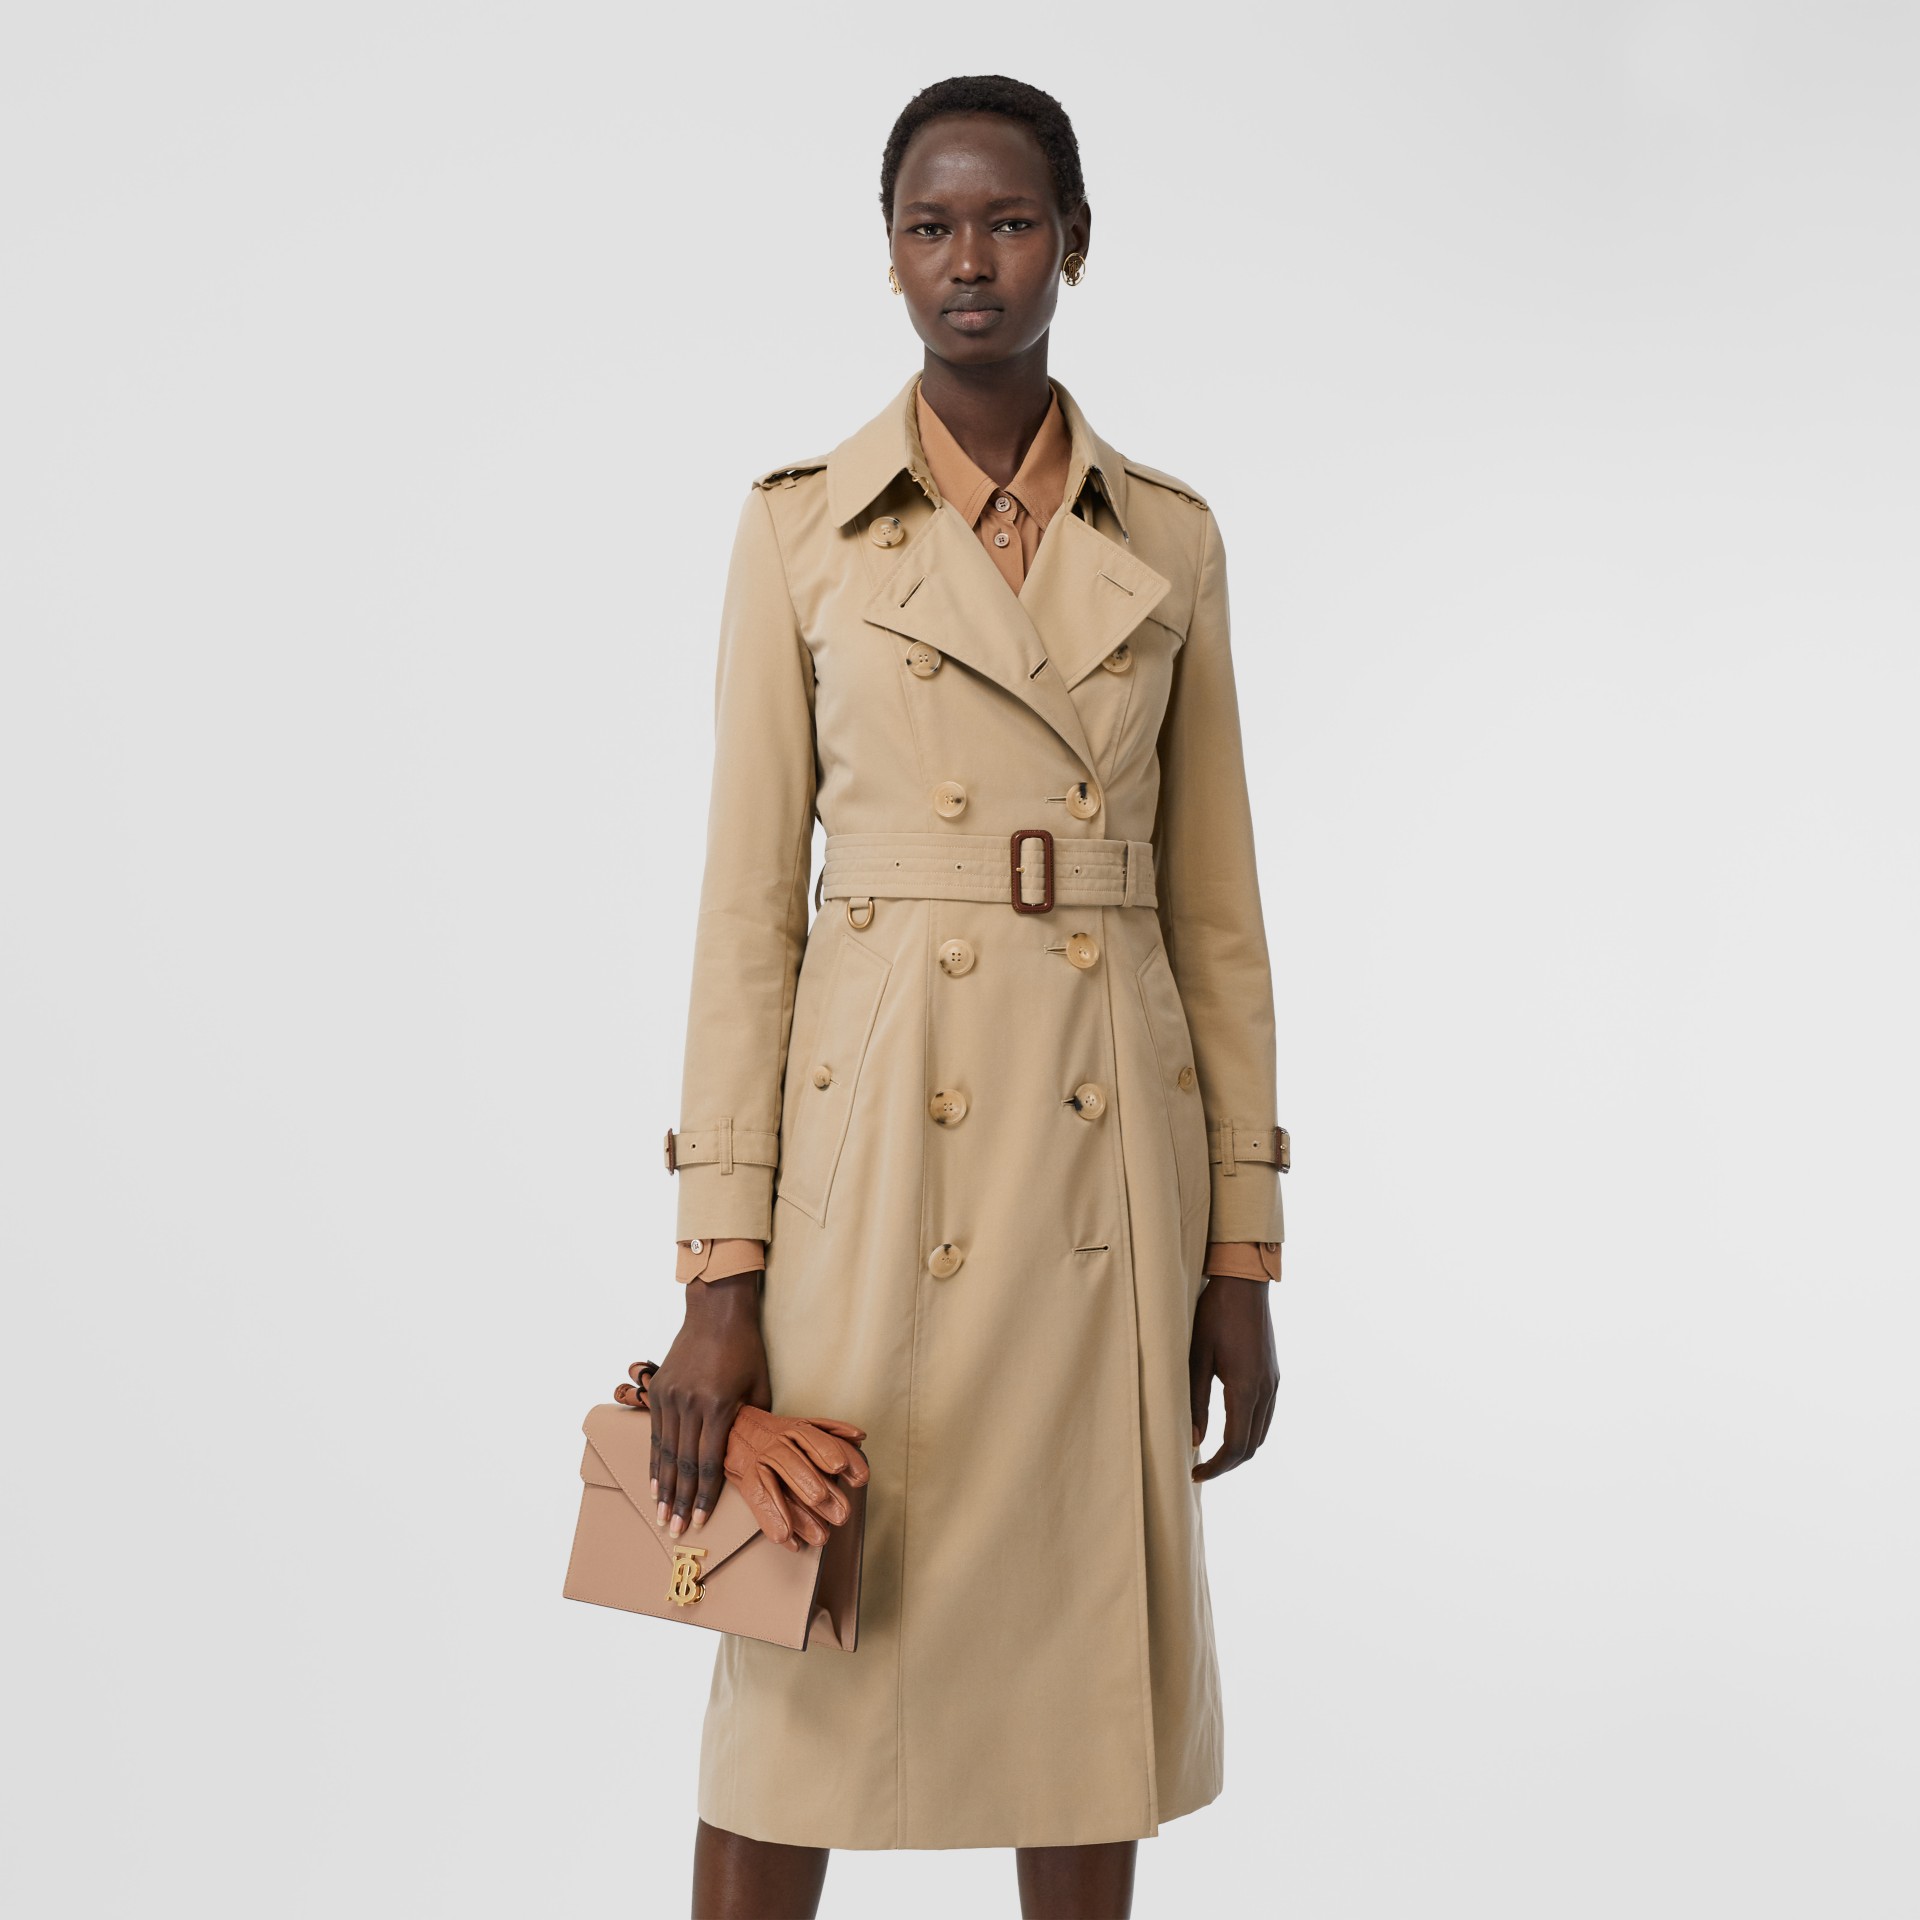 How To Tie Burberry Trench Coat Belt In The Back - FerisGraphics